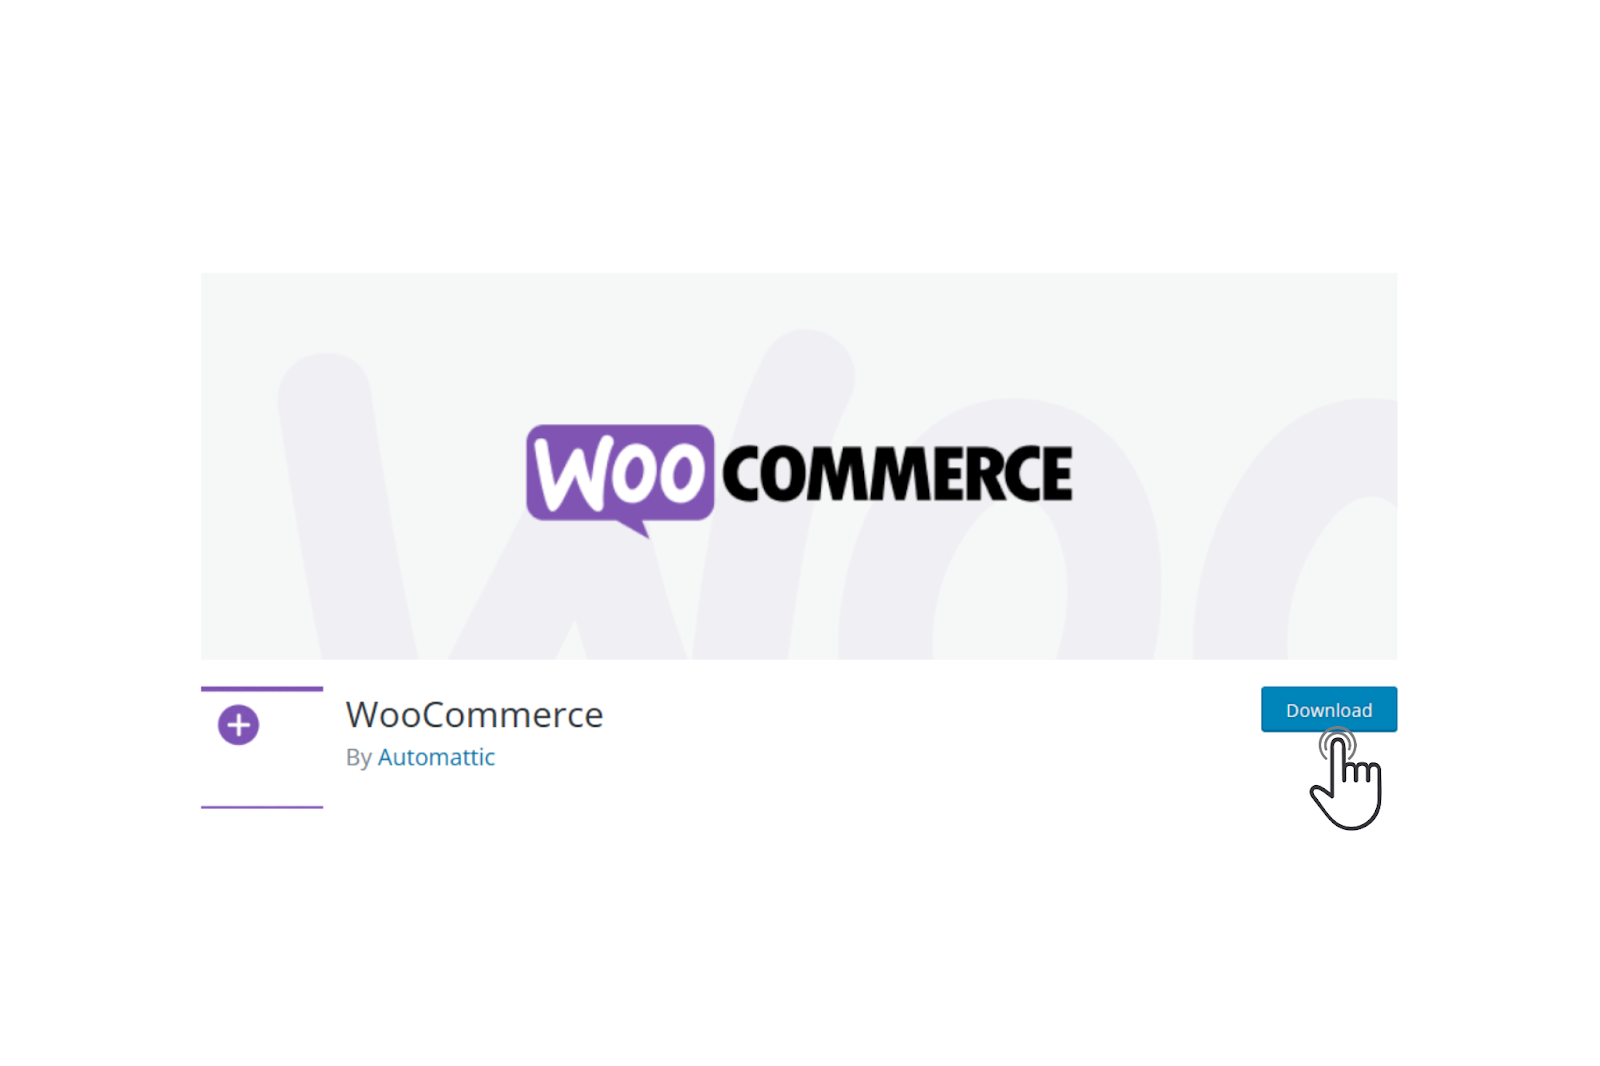 A white page with a purple speech bubble that says 'WOO' in the middle, and next to it says 'COMMERCE.' Below, there is a download button, and again it says WooCommerce, with by Automattic written below. 